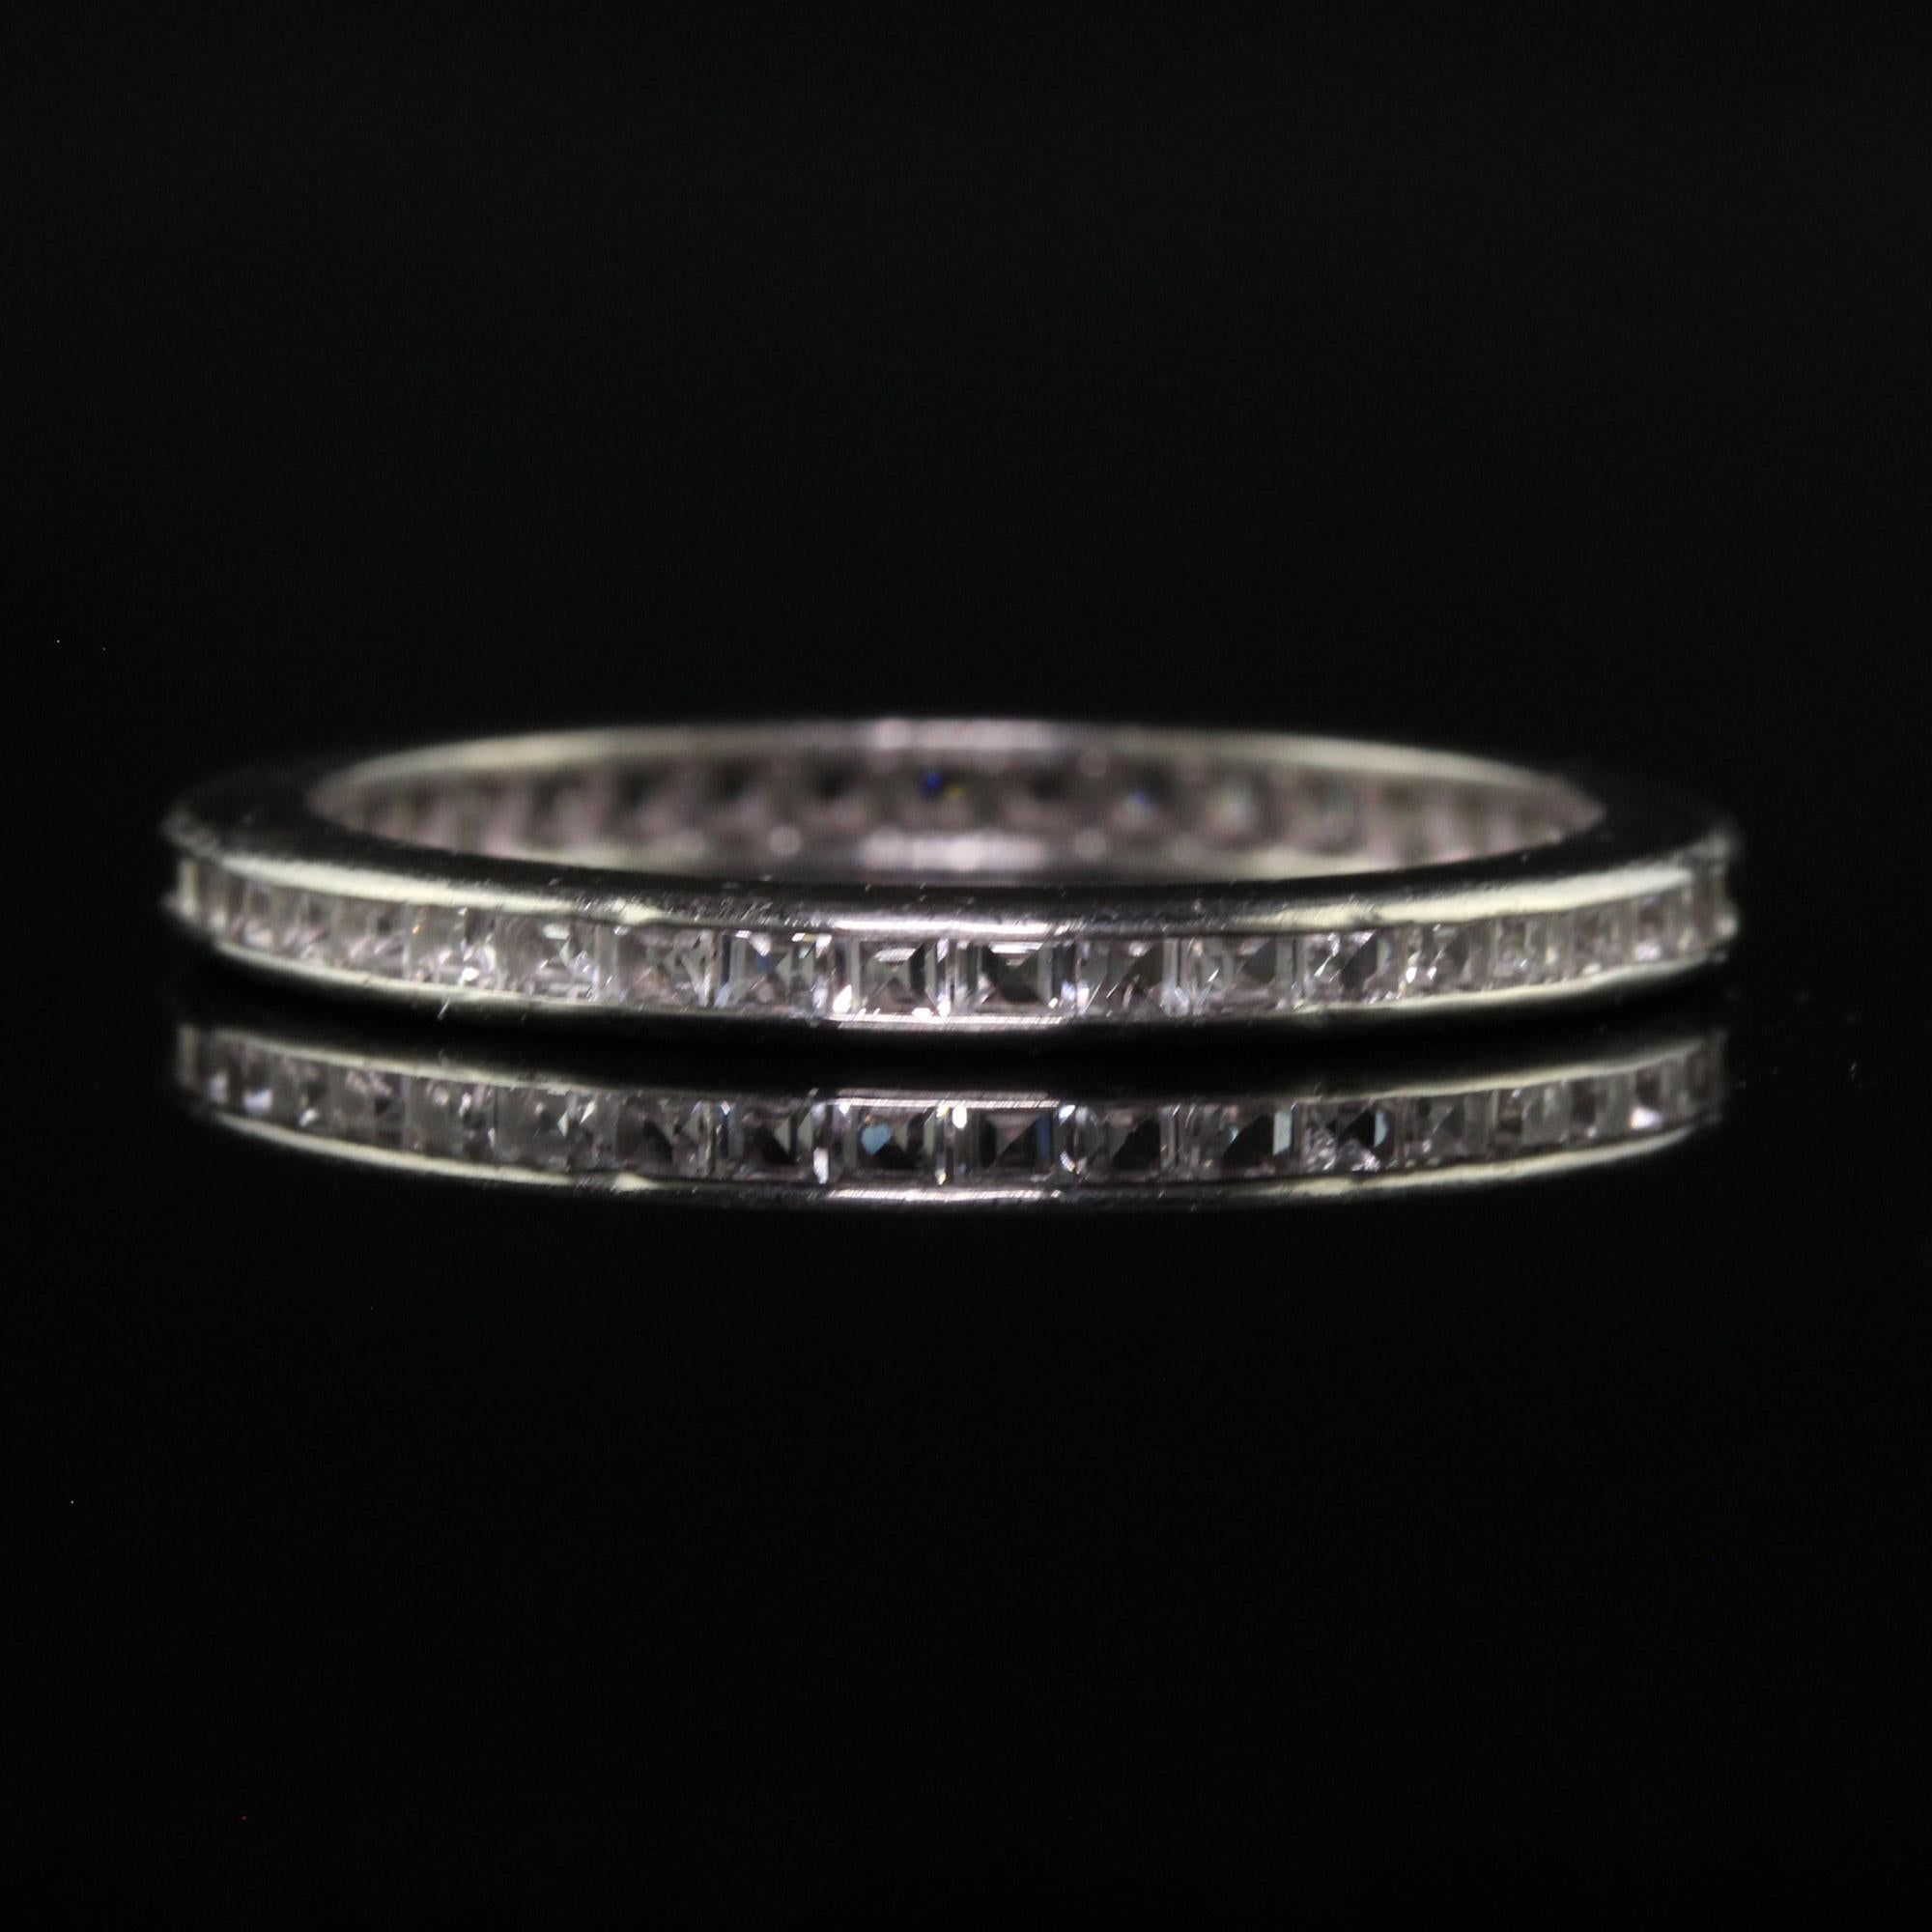 Antique Art Deco Platinum Carre Cut White Sapphire Eternity Band - Size 7 1/2 In Good Condition For Sale In Great Neck, NY